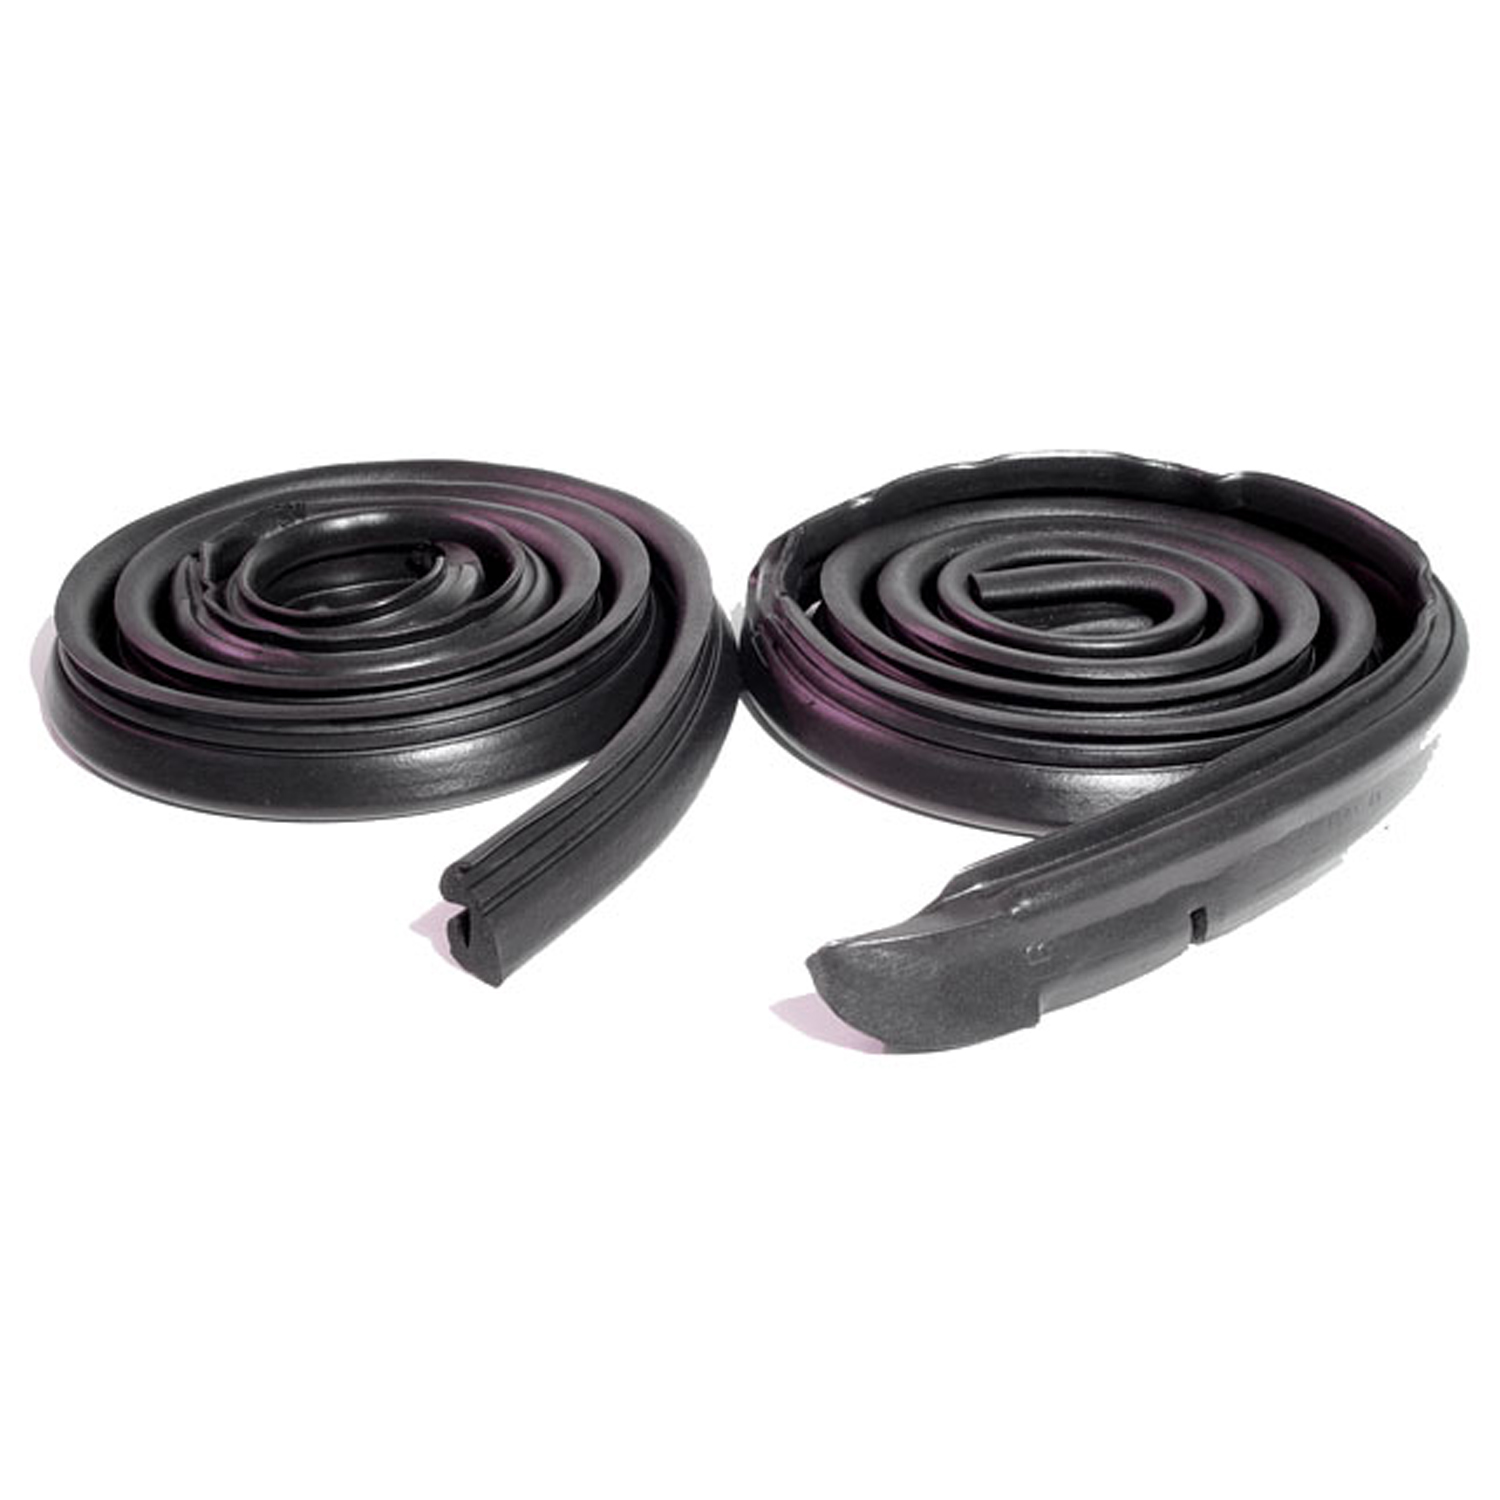 1965 Dodge Polara Molded Roof Rail Seals, for 2-Door Hardtop without Post-RR 4001-C